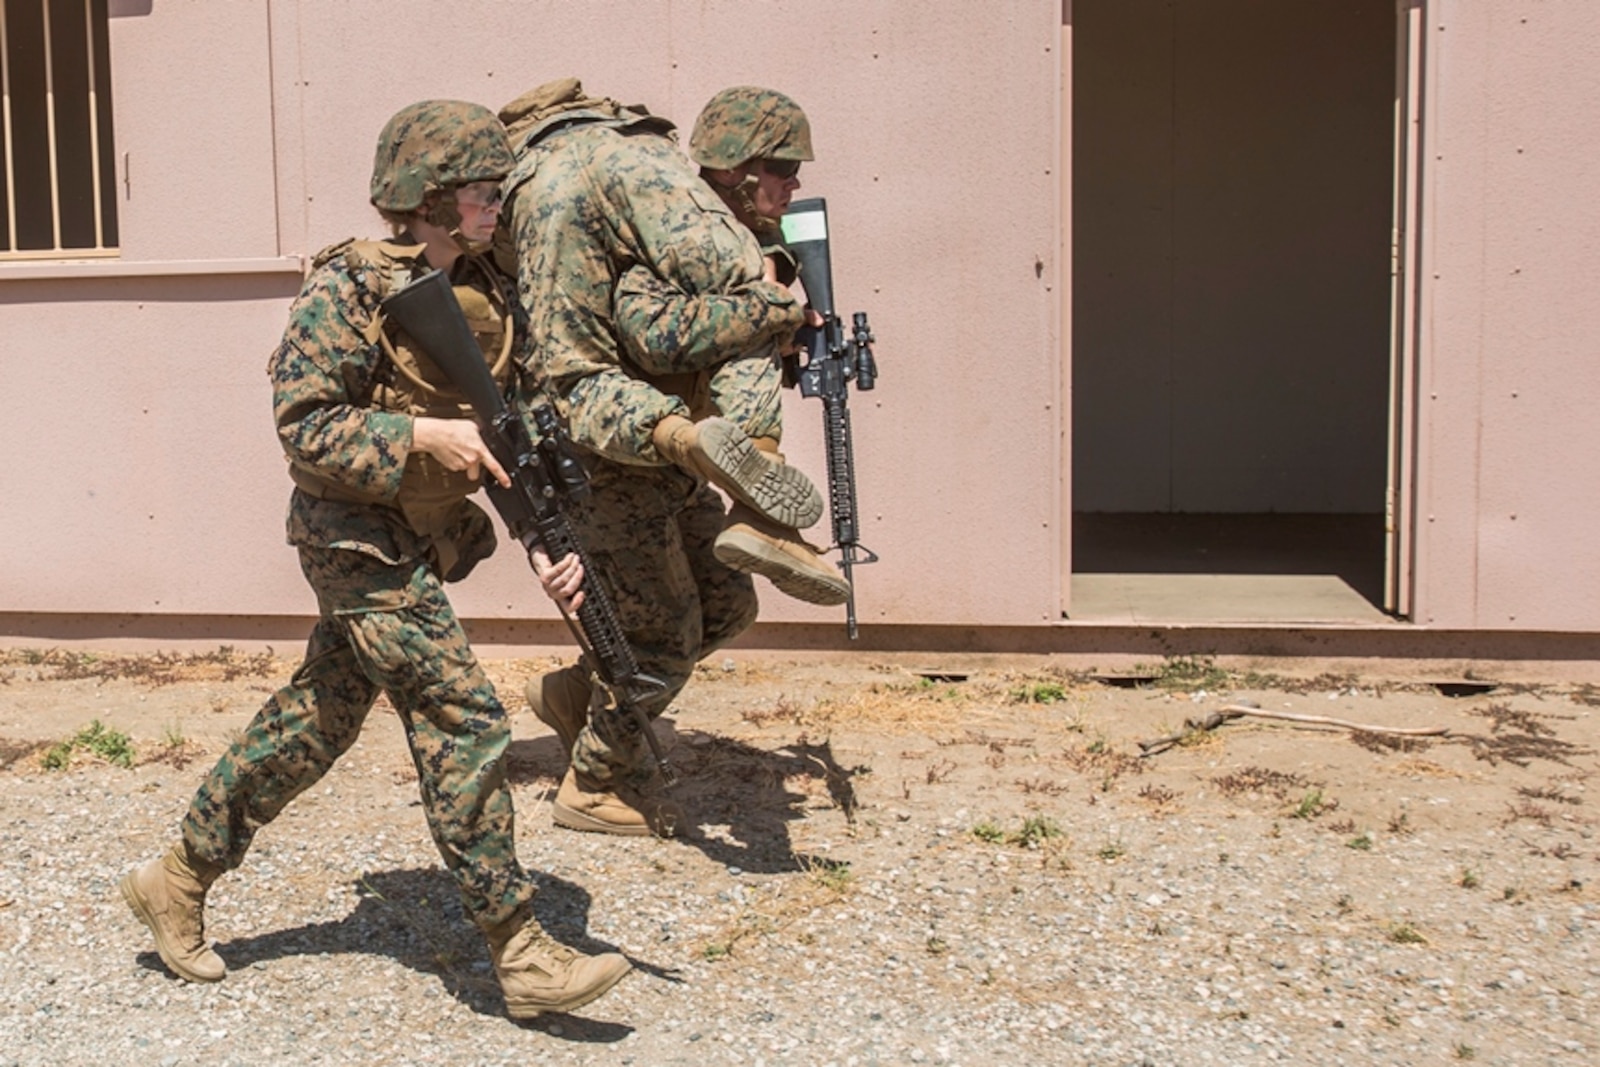 A U.S. Marine with Combat Logistics Battalion 13 provides security while a simulated casualty is transported to safety during a field medical training exercise on Marine Corps Base Camp Pendleton, Calif., Jul. 18, 2017. The Marines are placed in scenarios meant to test them not only tactically through patrolling but also establishing and securing an expedient casualty collection point, assessment, treatment and triage of all casualties, and movement of patient under fire to a landing zone.